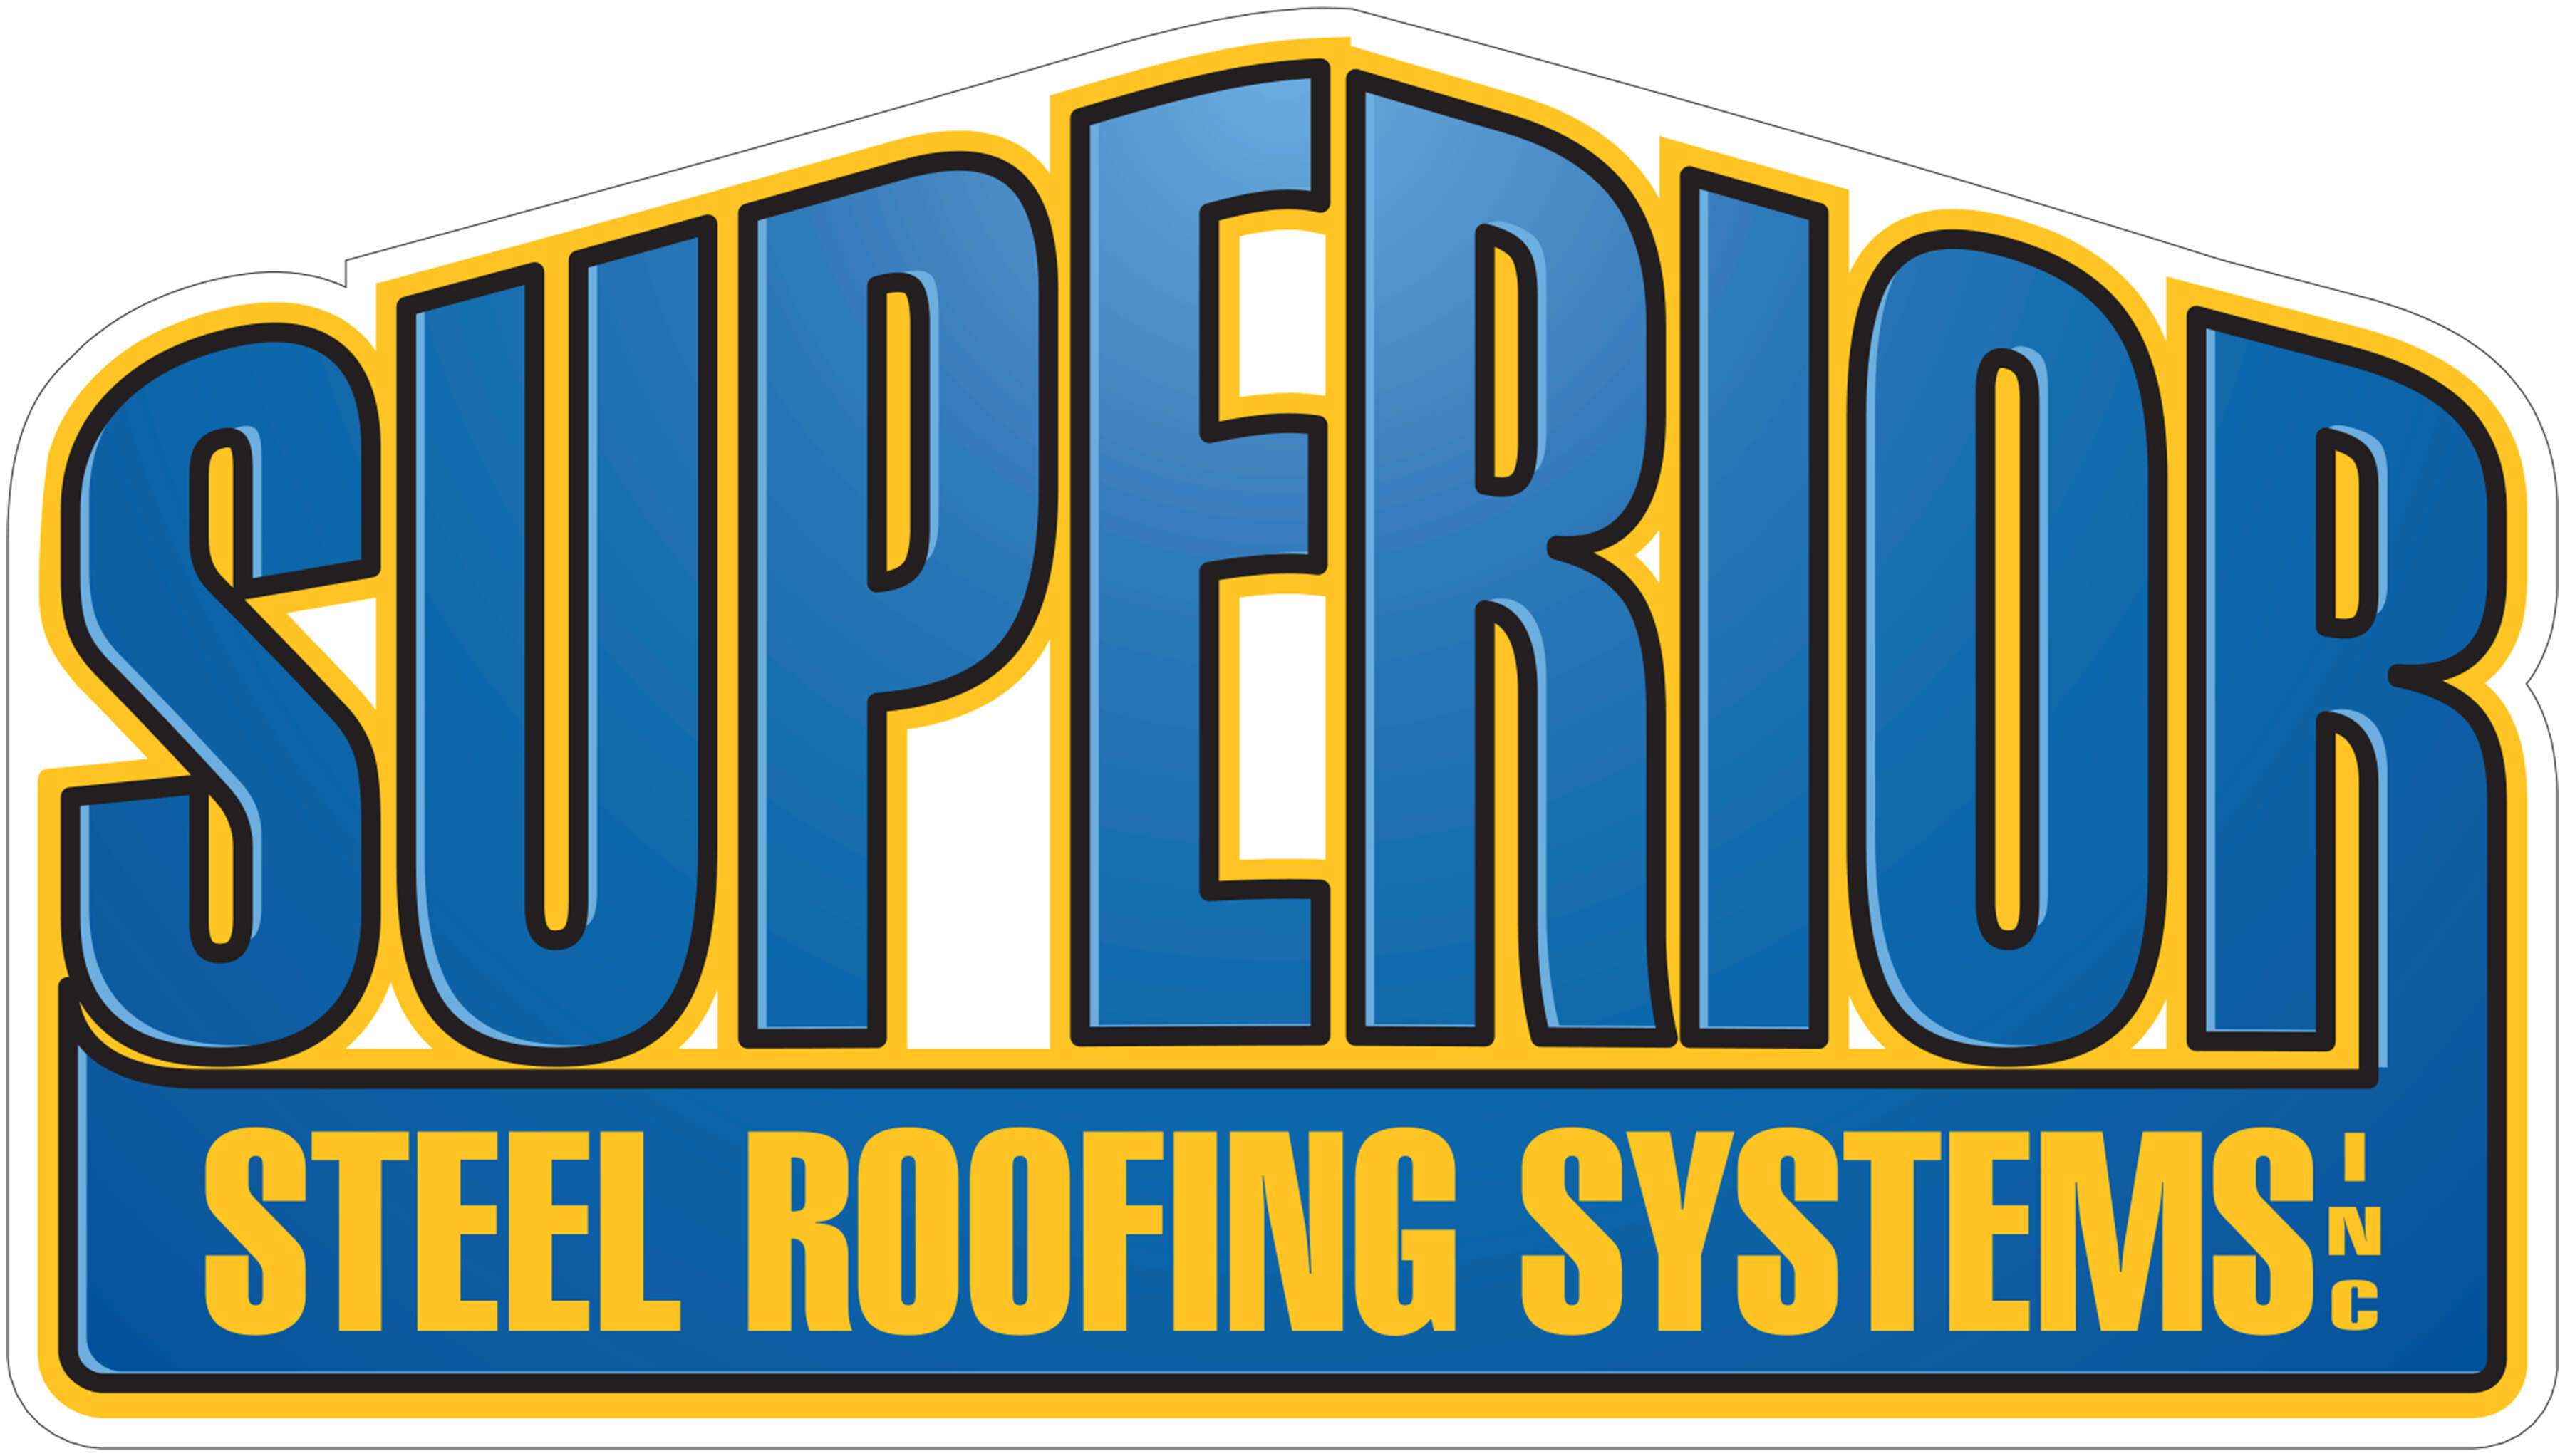 Superior Steel Roofing Systems